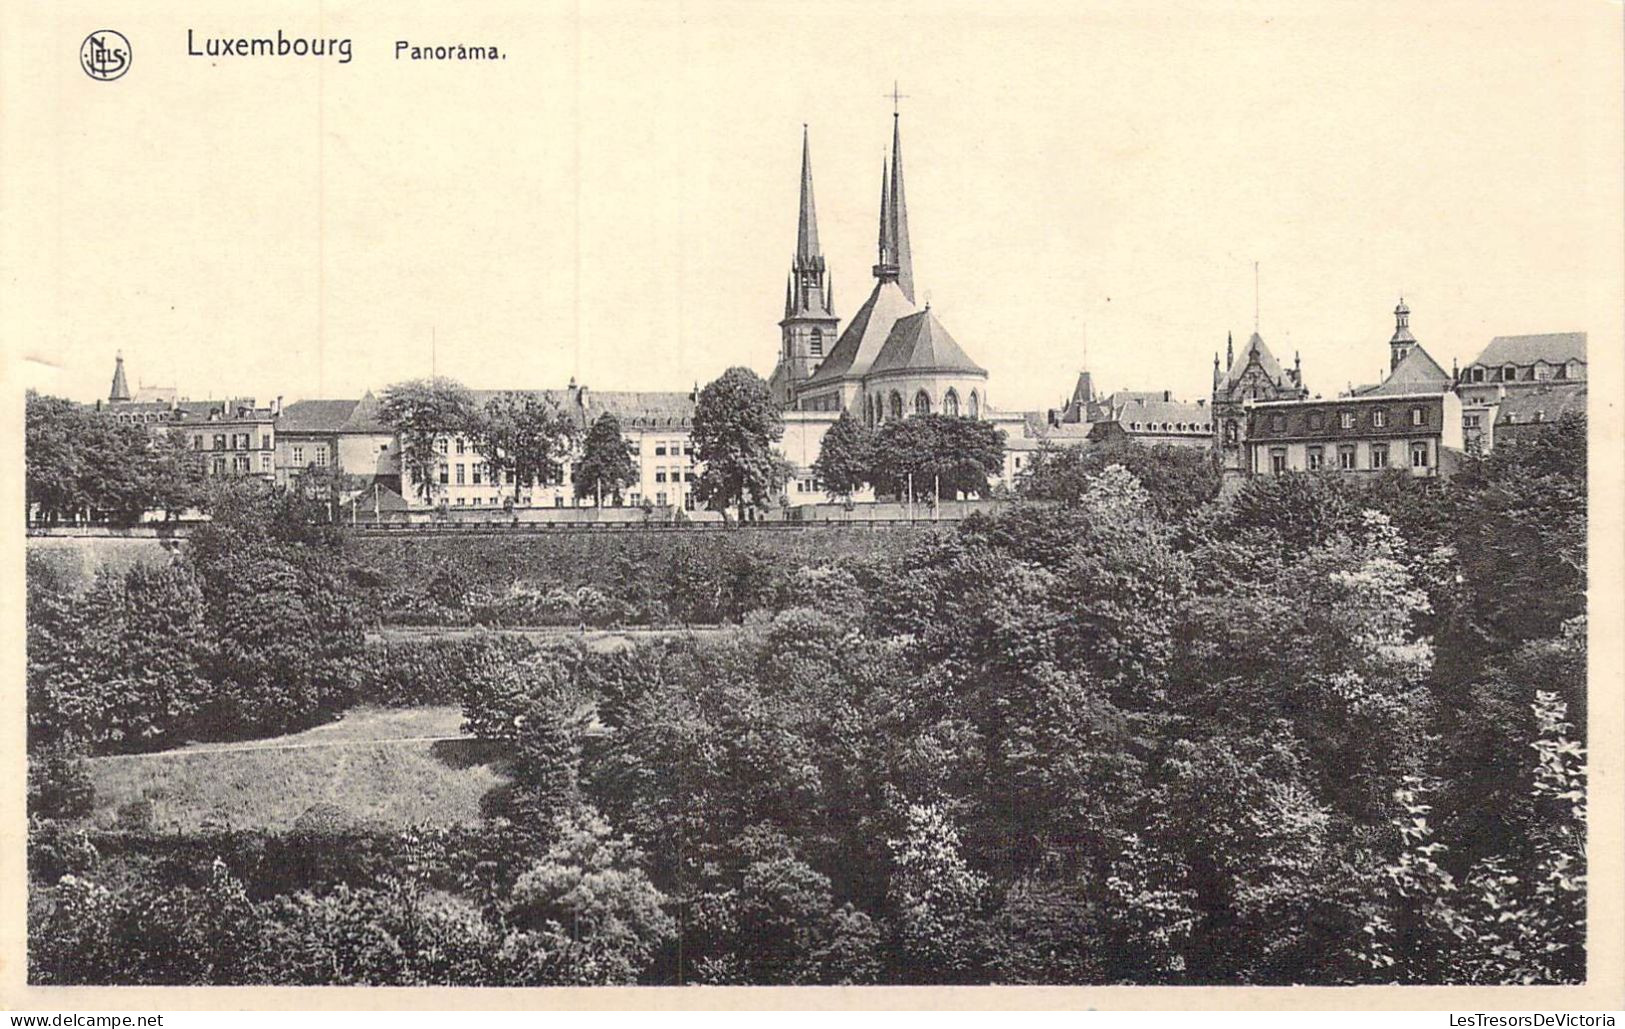 LUXEMBOURG - Panorama - Carte Postale Ancienne - Luxembourg - Ville